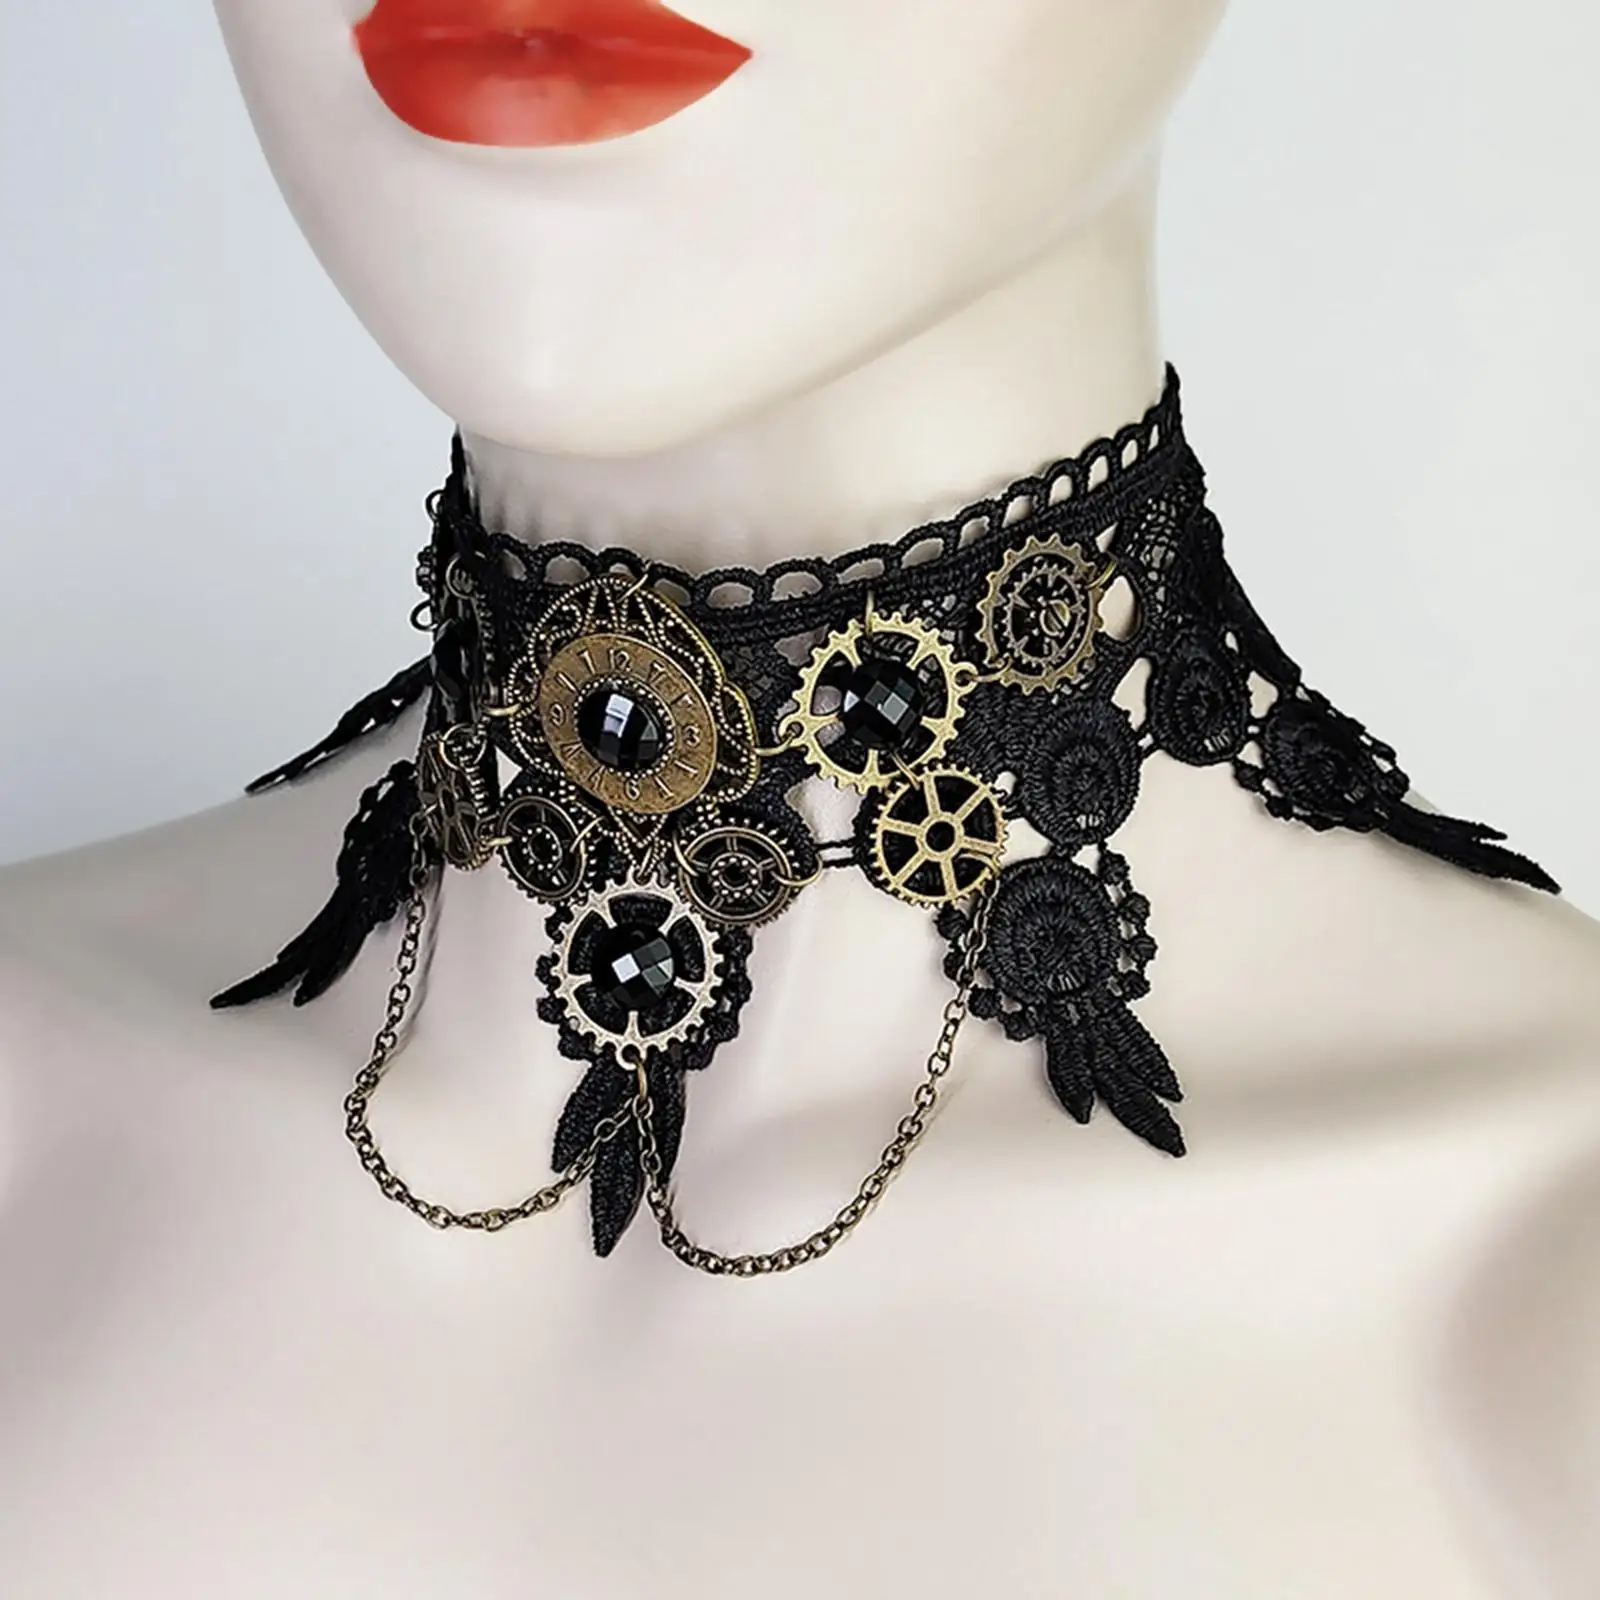 Black Lace Gothic Choker Necklace, Punk  Elegant Gear Pendant, for Wedding Party Halloween Costume Cosplay Women Girls.